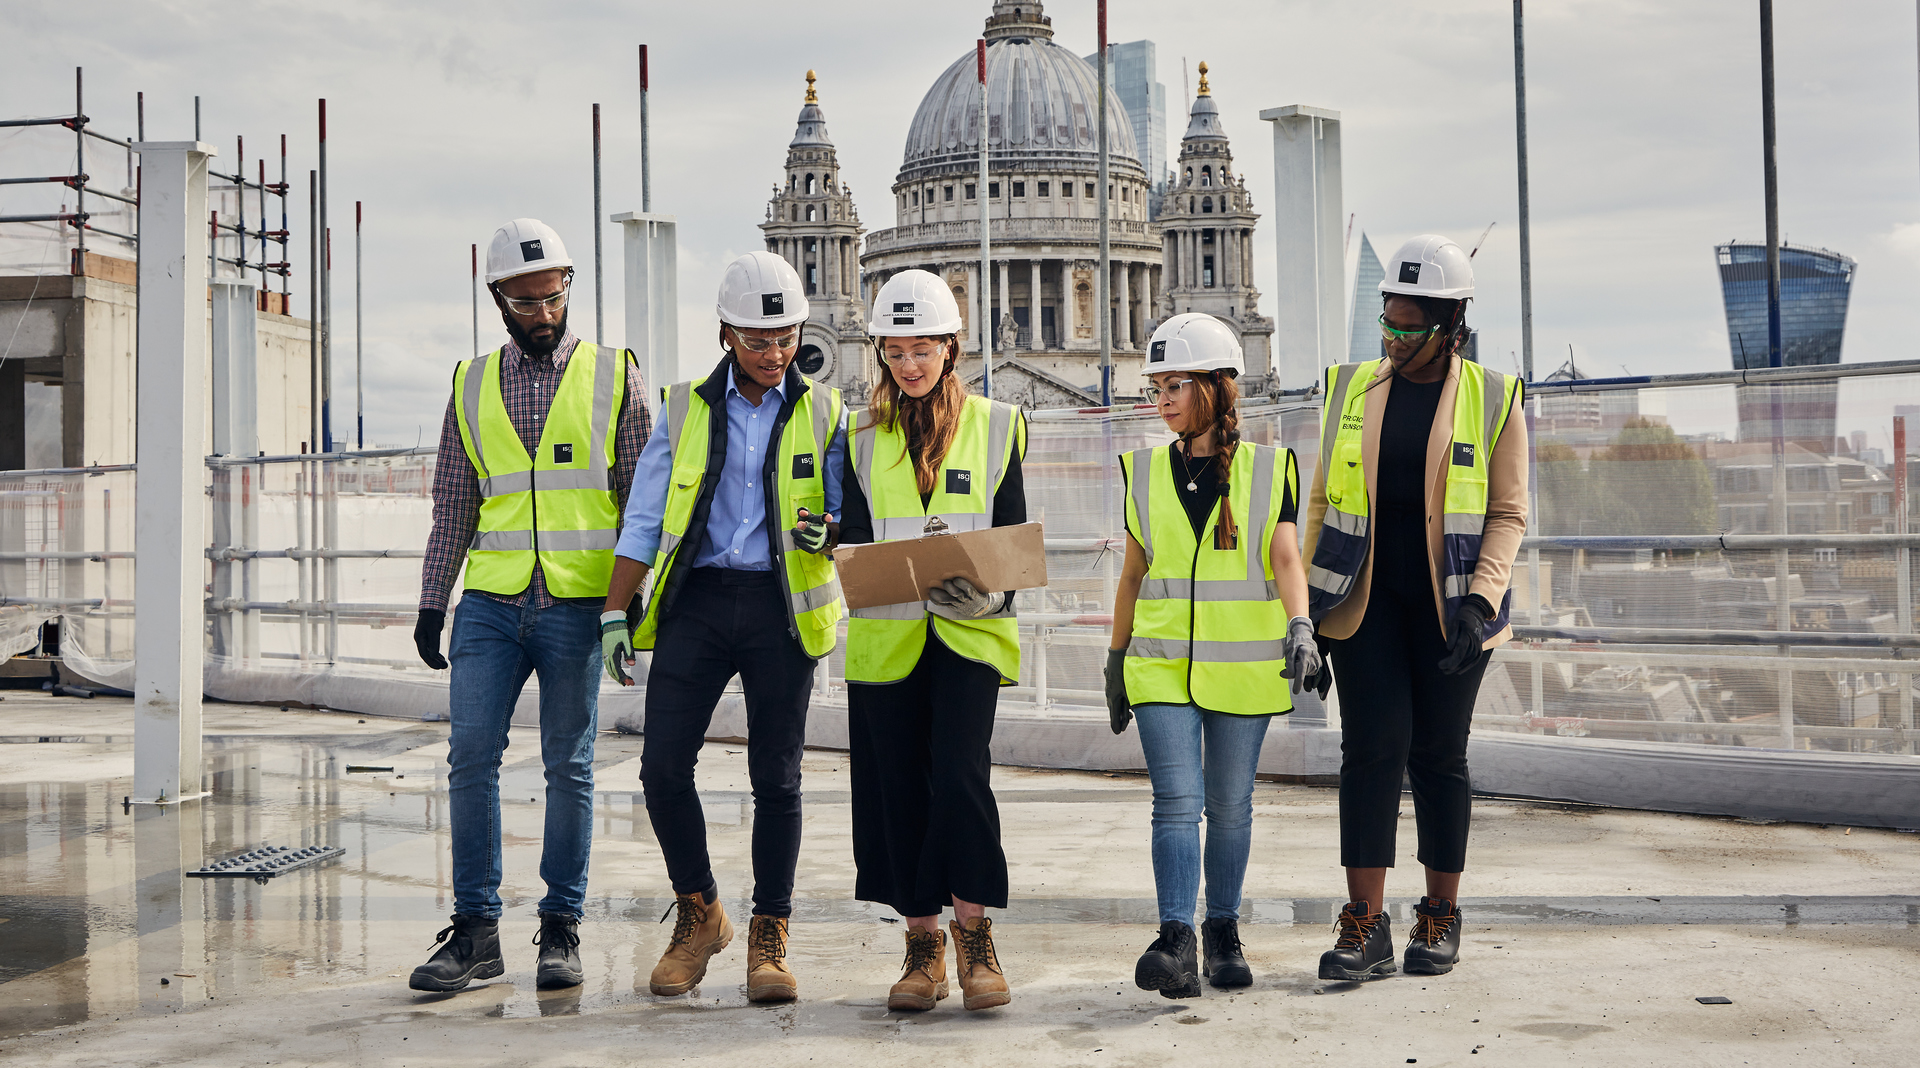 Photograph of a group of construction workers at St Paul's Cathedral